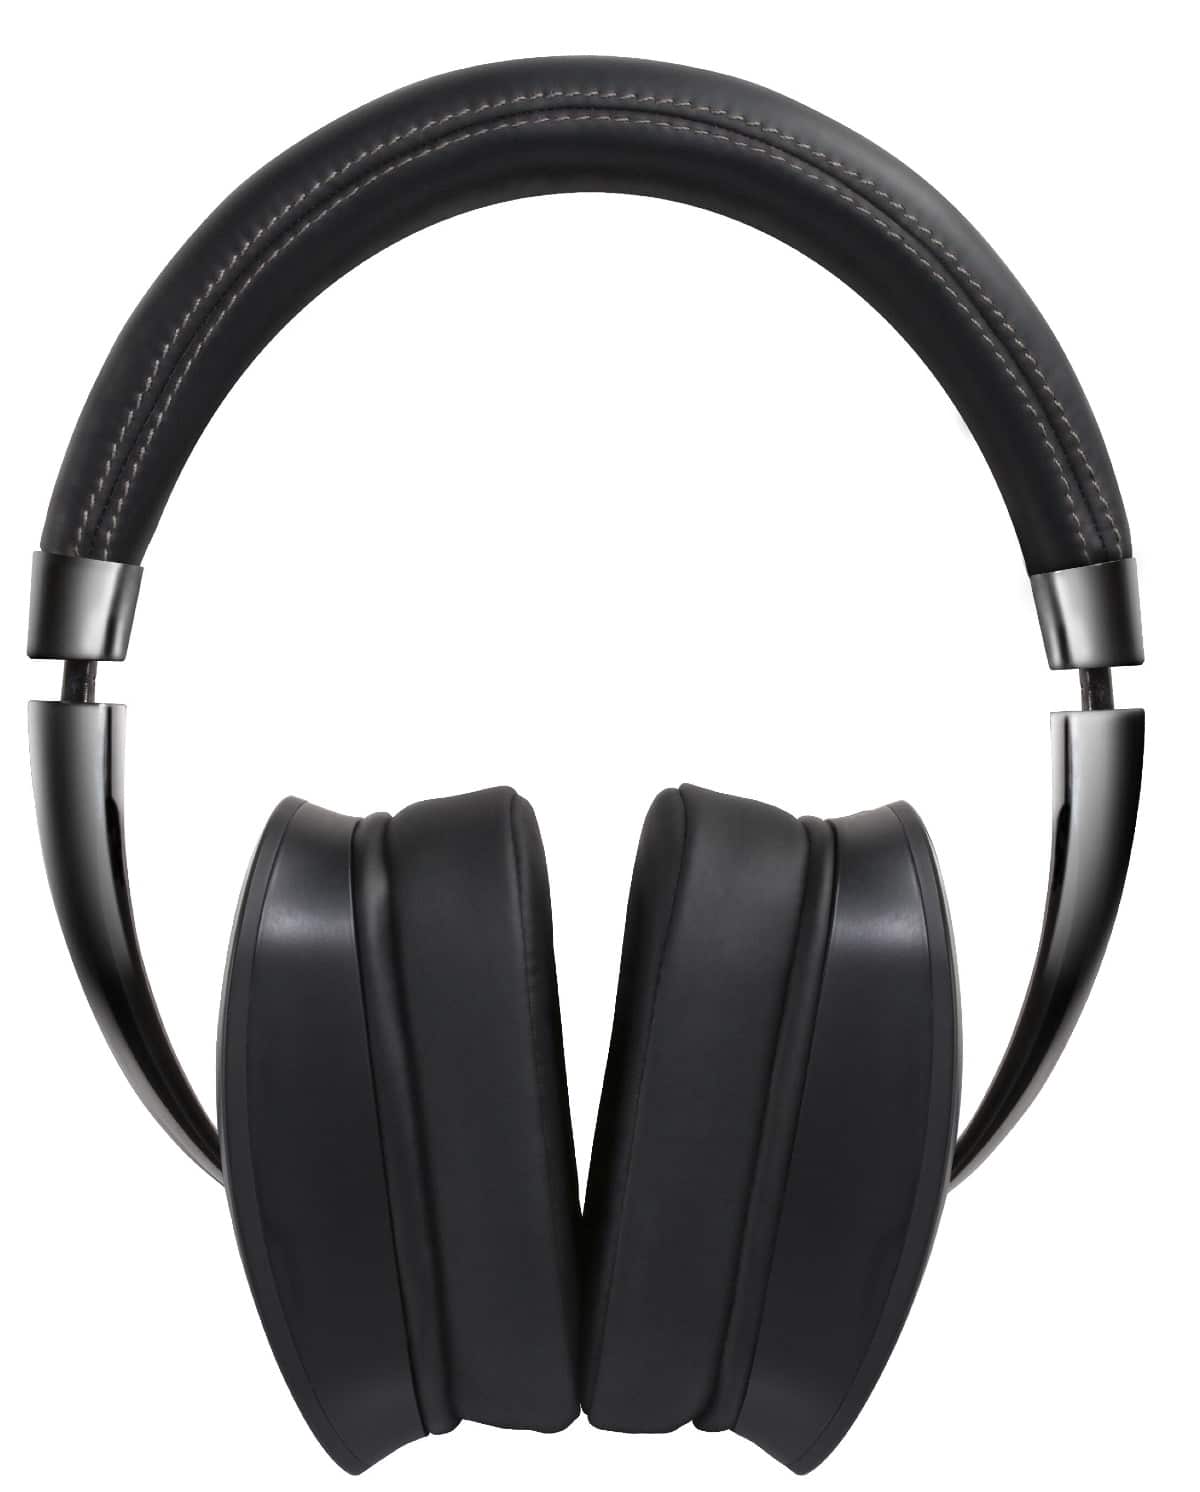 HP70 VISO Headphones From NAD: Wireless, Active Noise-Cancelling